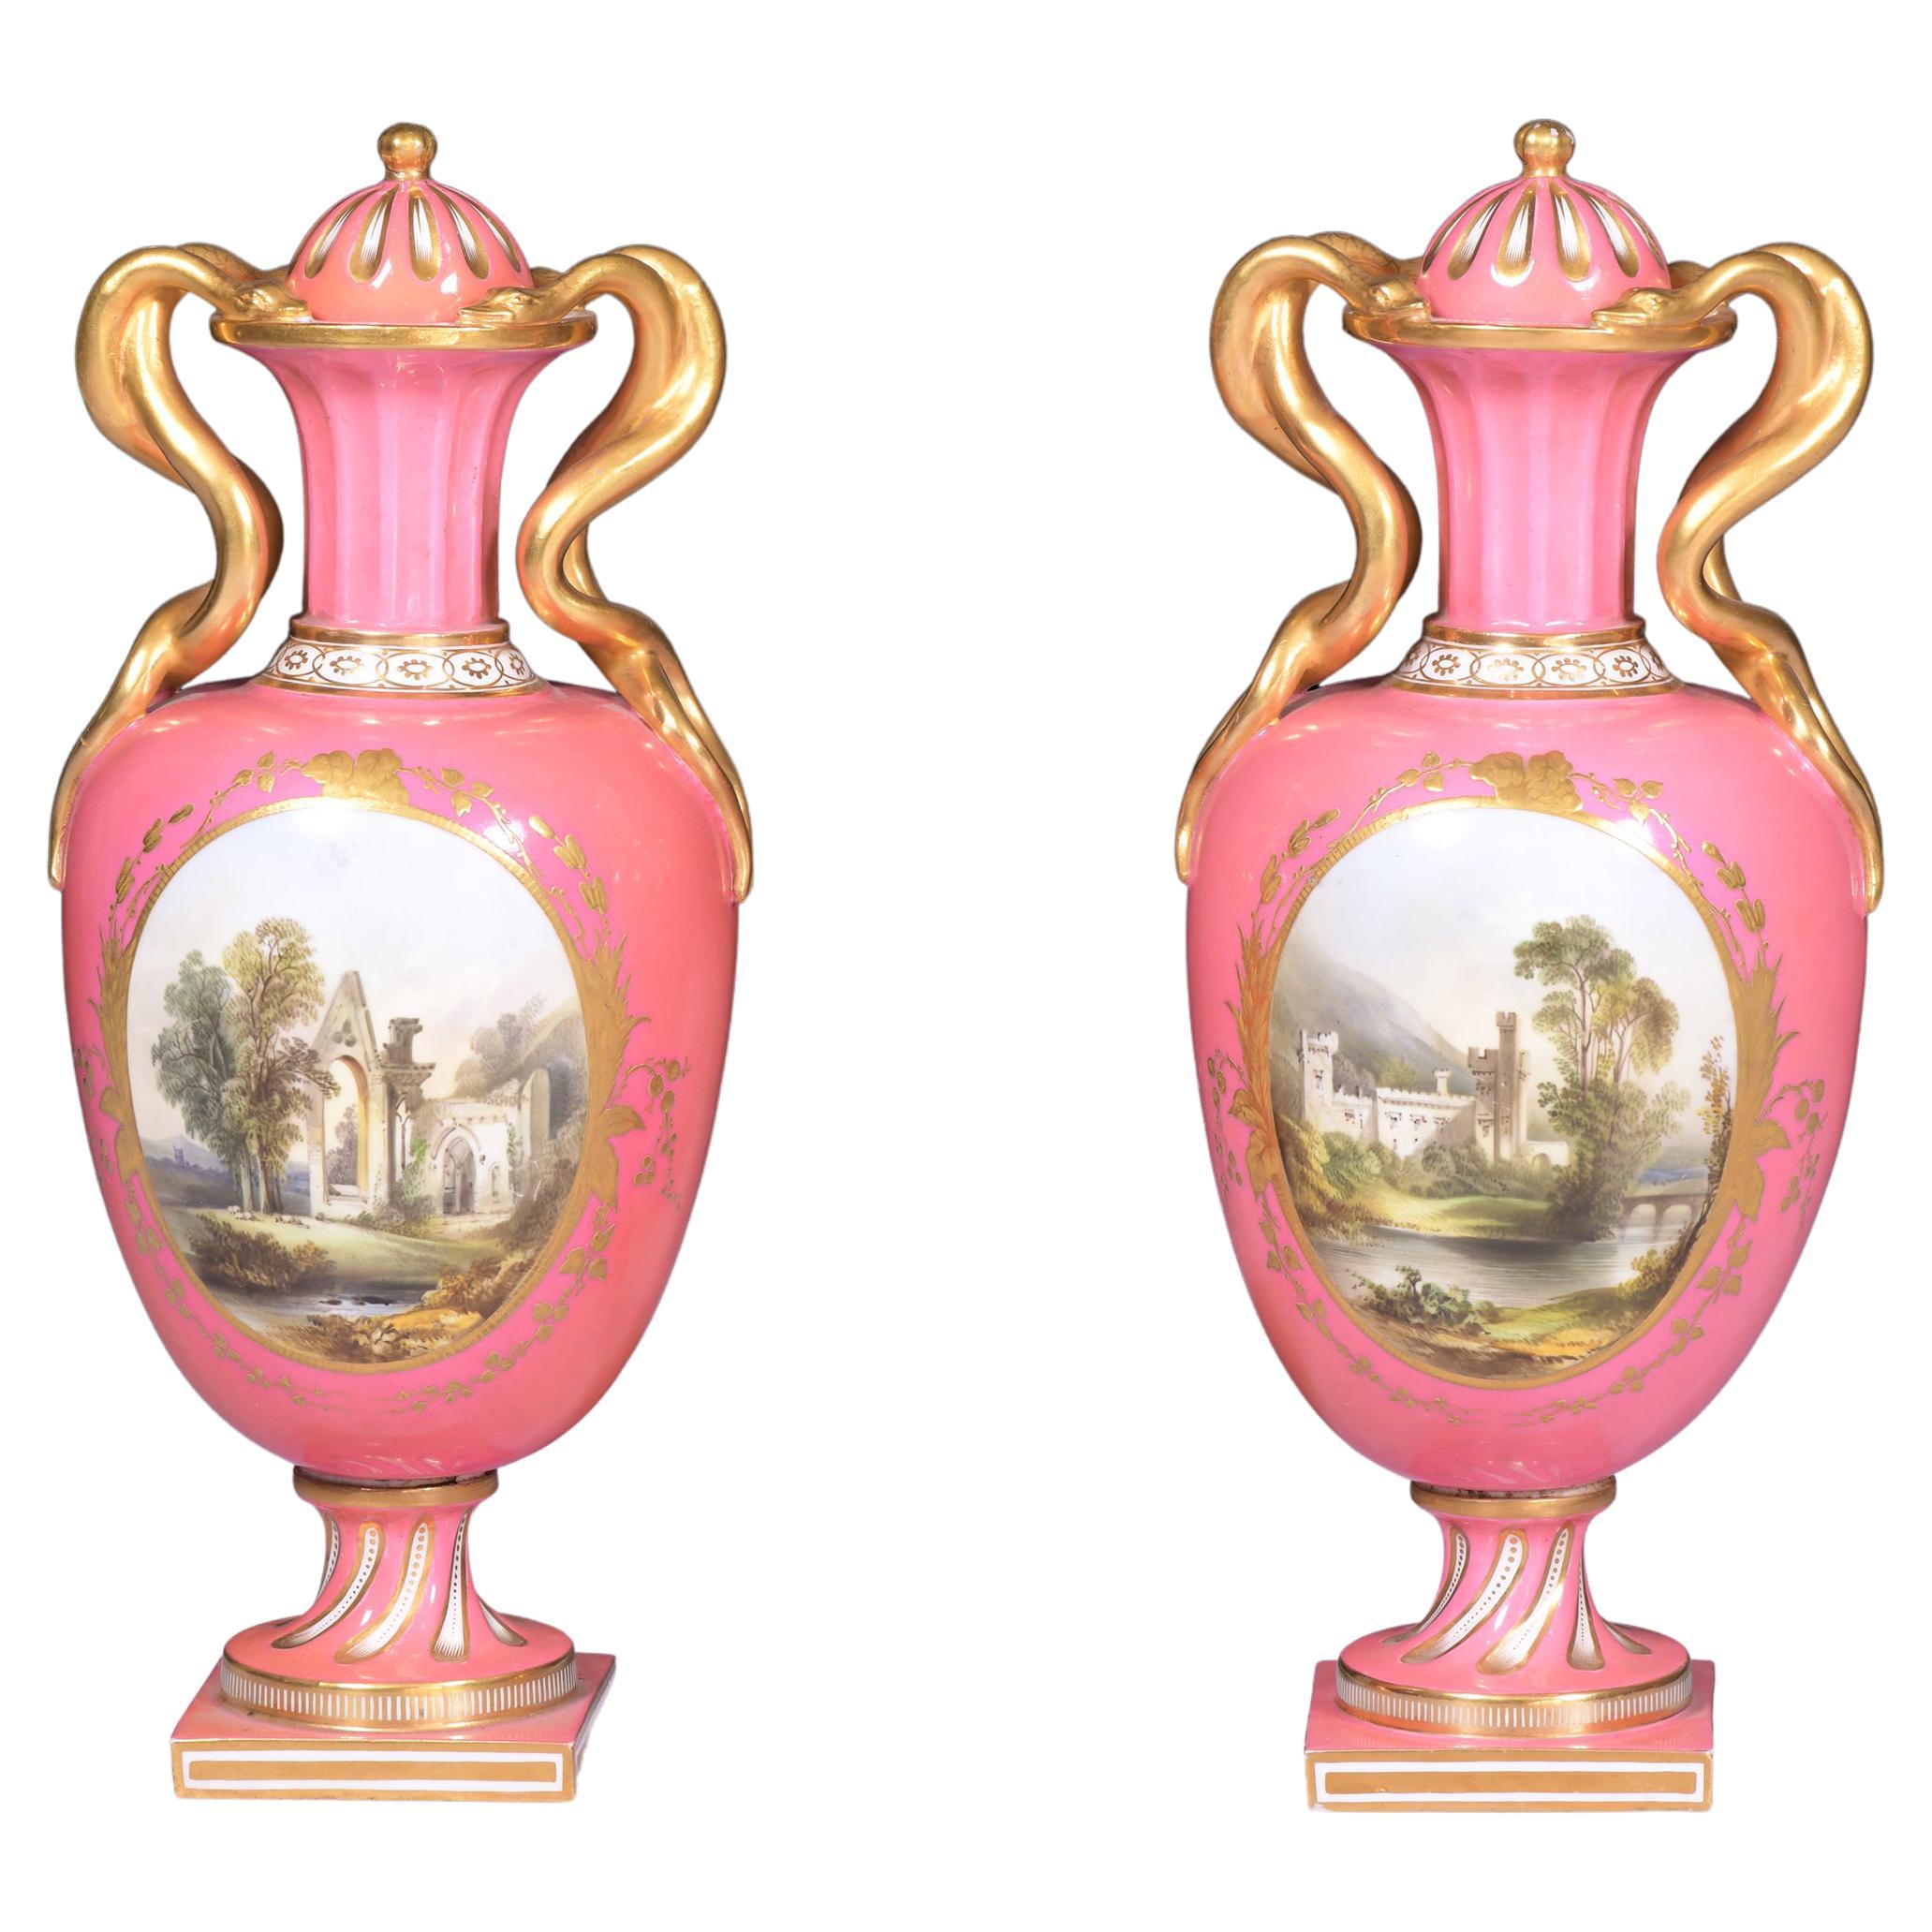 Pair of 19th Century English Porcelain Vases & Covers by Coalport